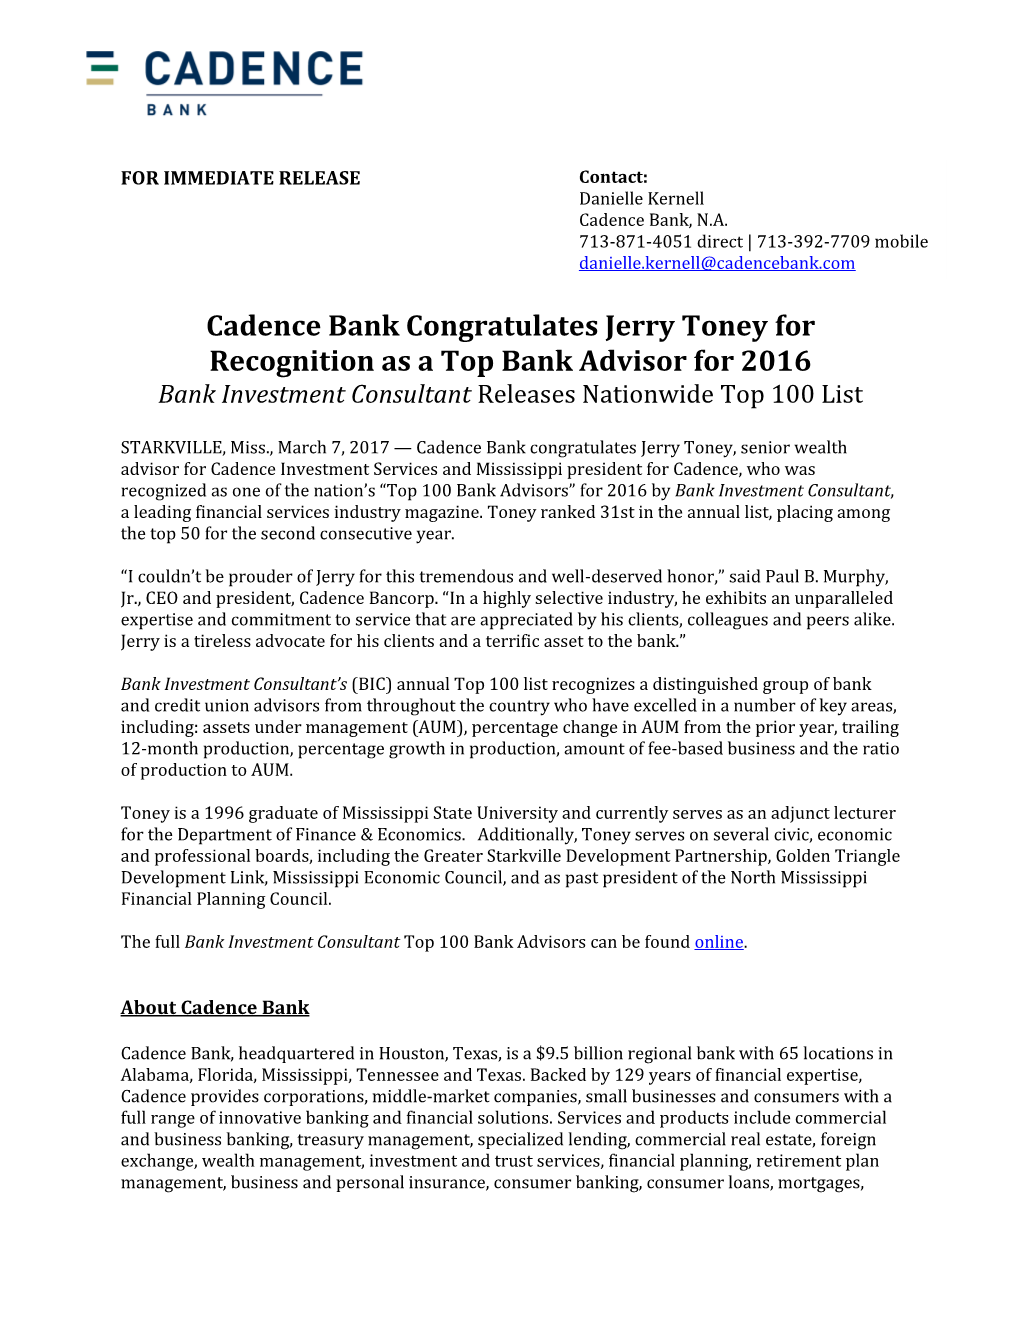 Cadence Bank Congratulates Jerry Toney for Recognition As a Top Bank Advisor for 2016 Bank Investment Consultant Releases Nationwide Top 100 List